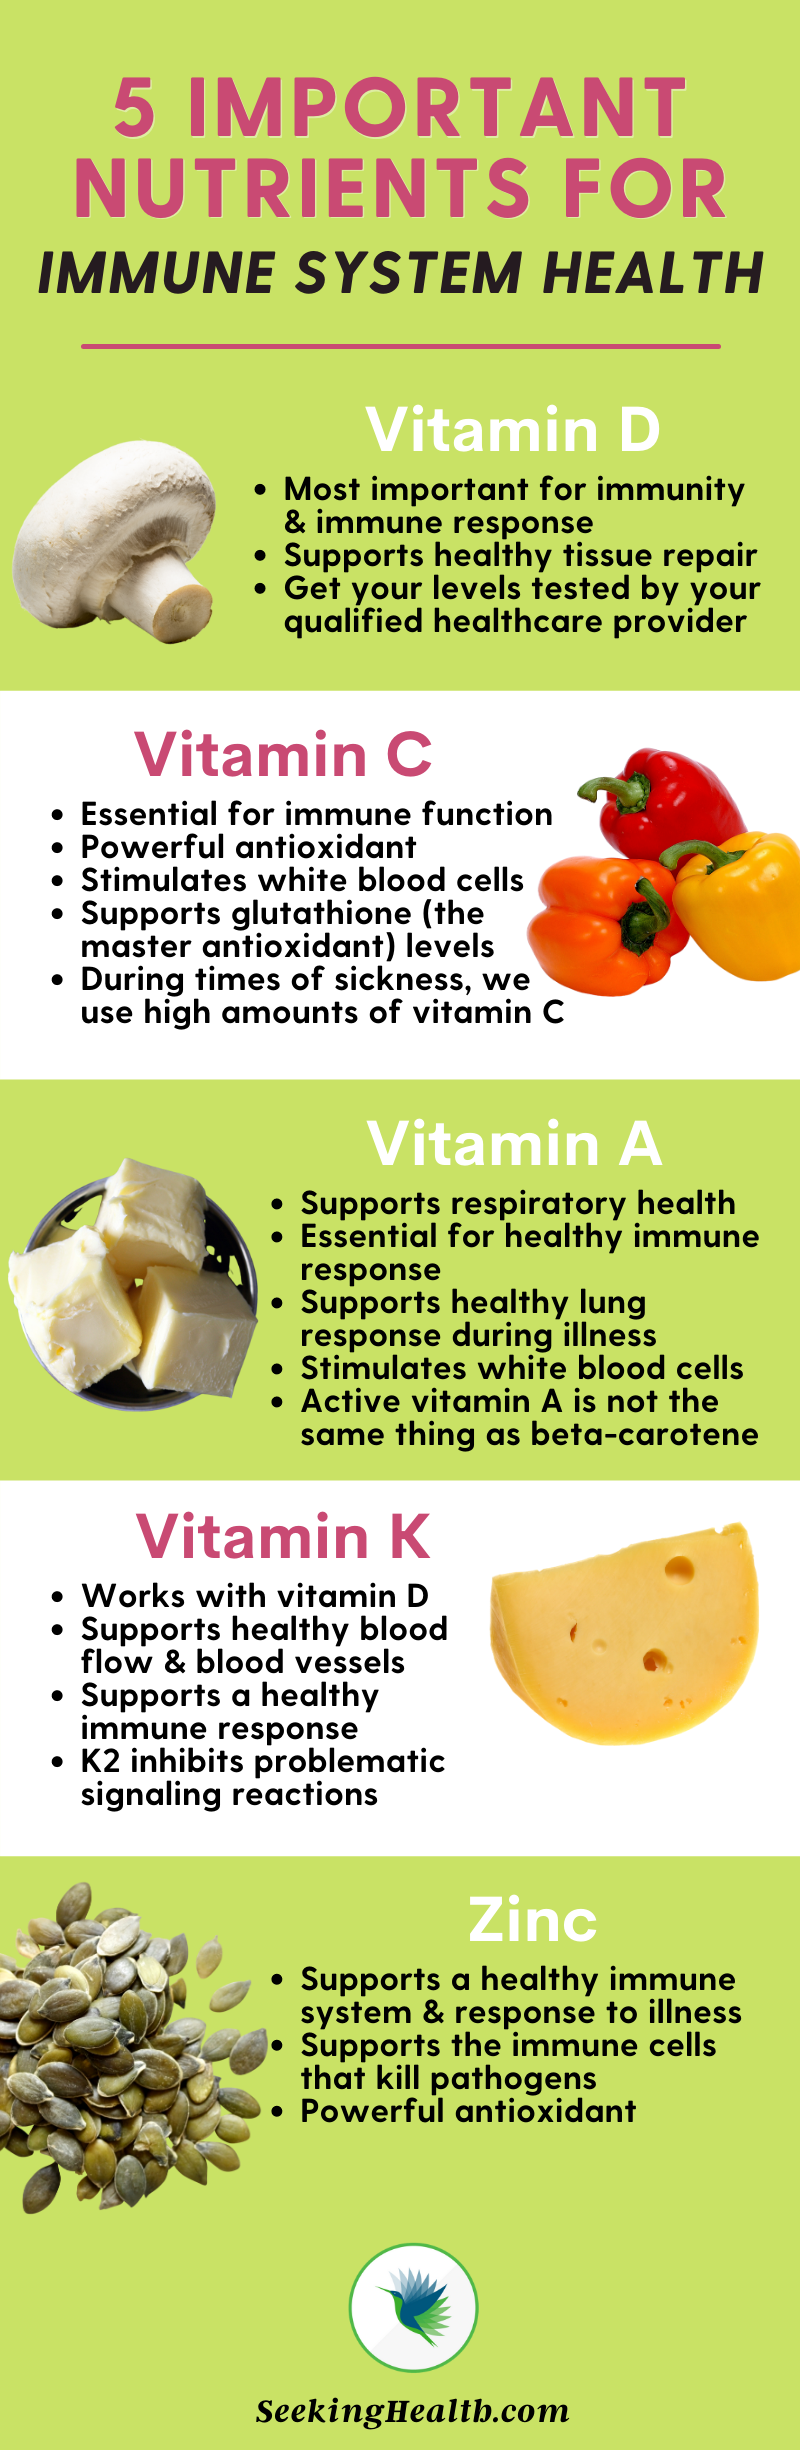 5_NUTRIENTS_FOR_IMMUNE_SYSTEM_HEALTH